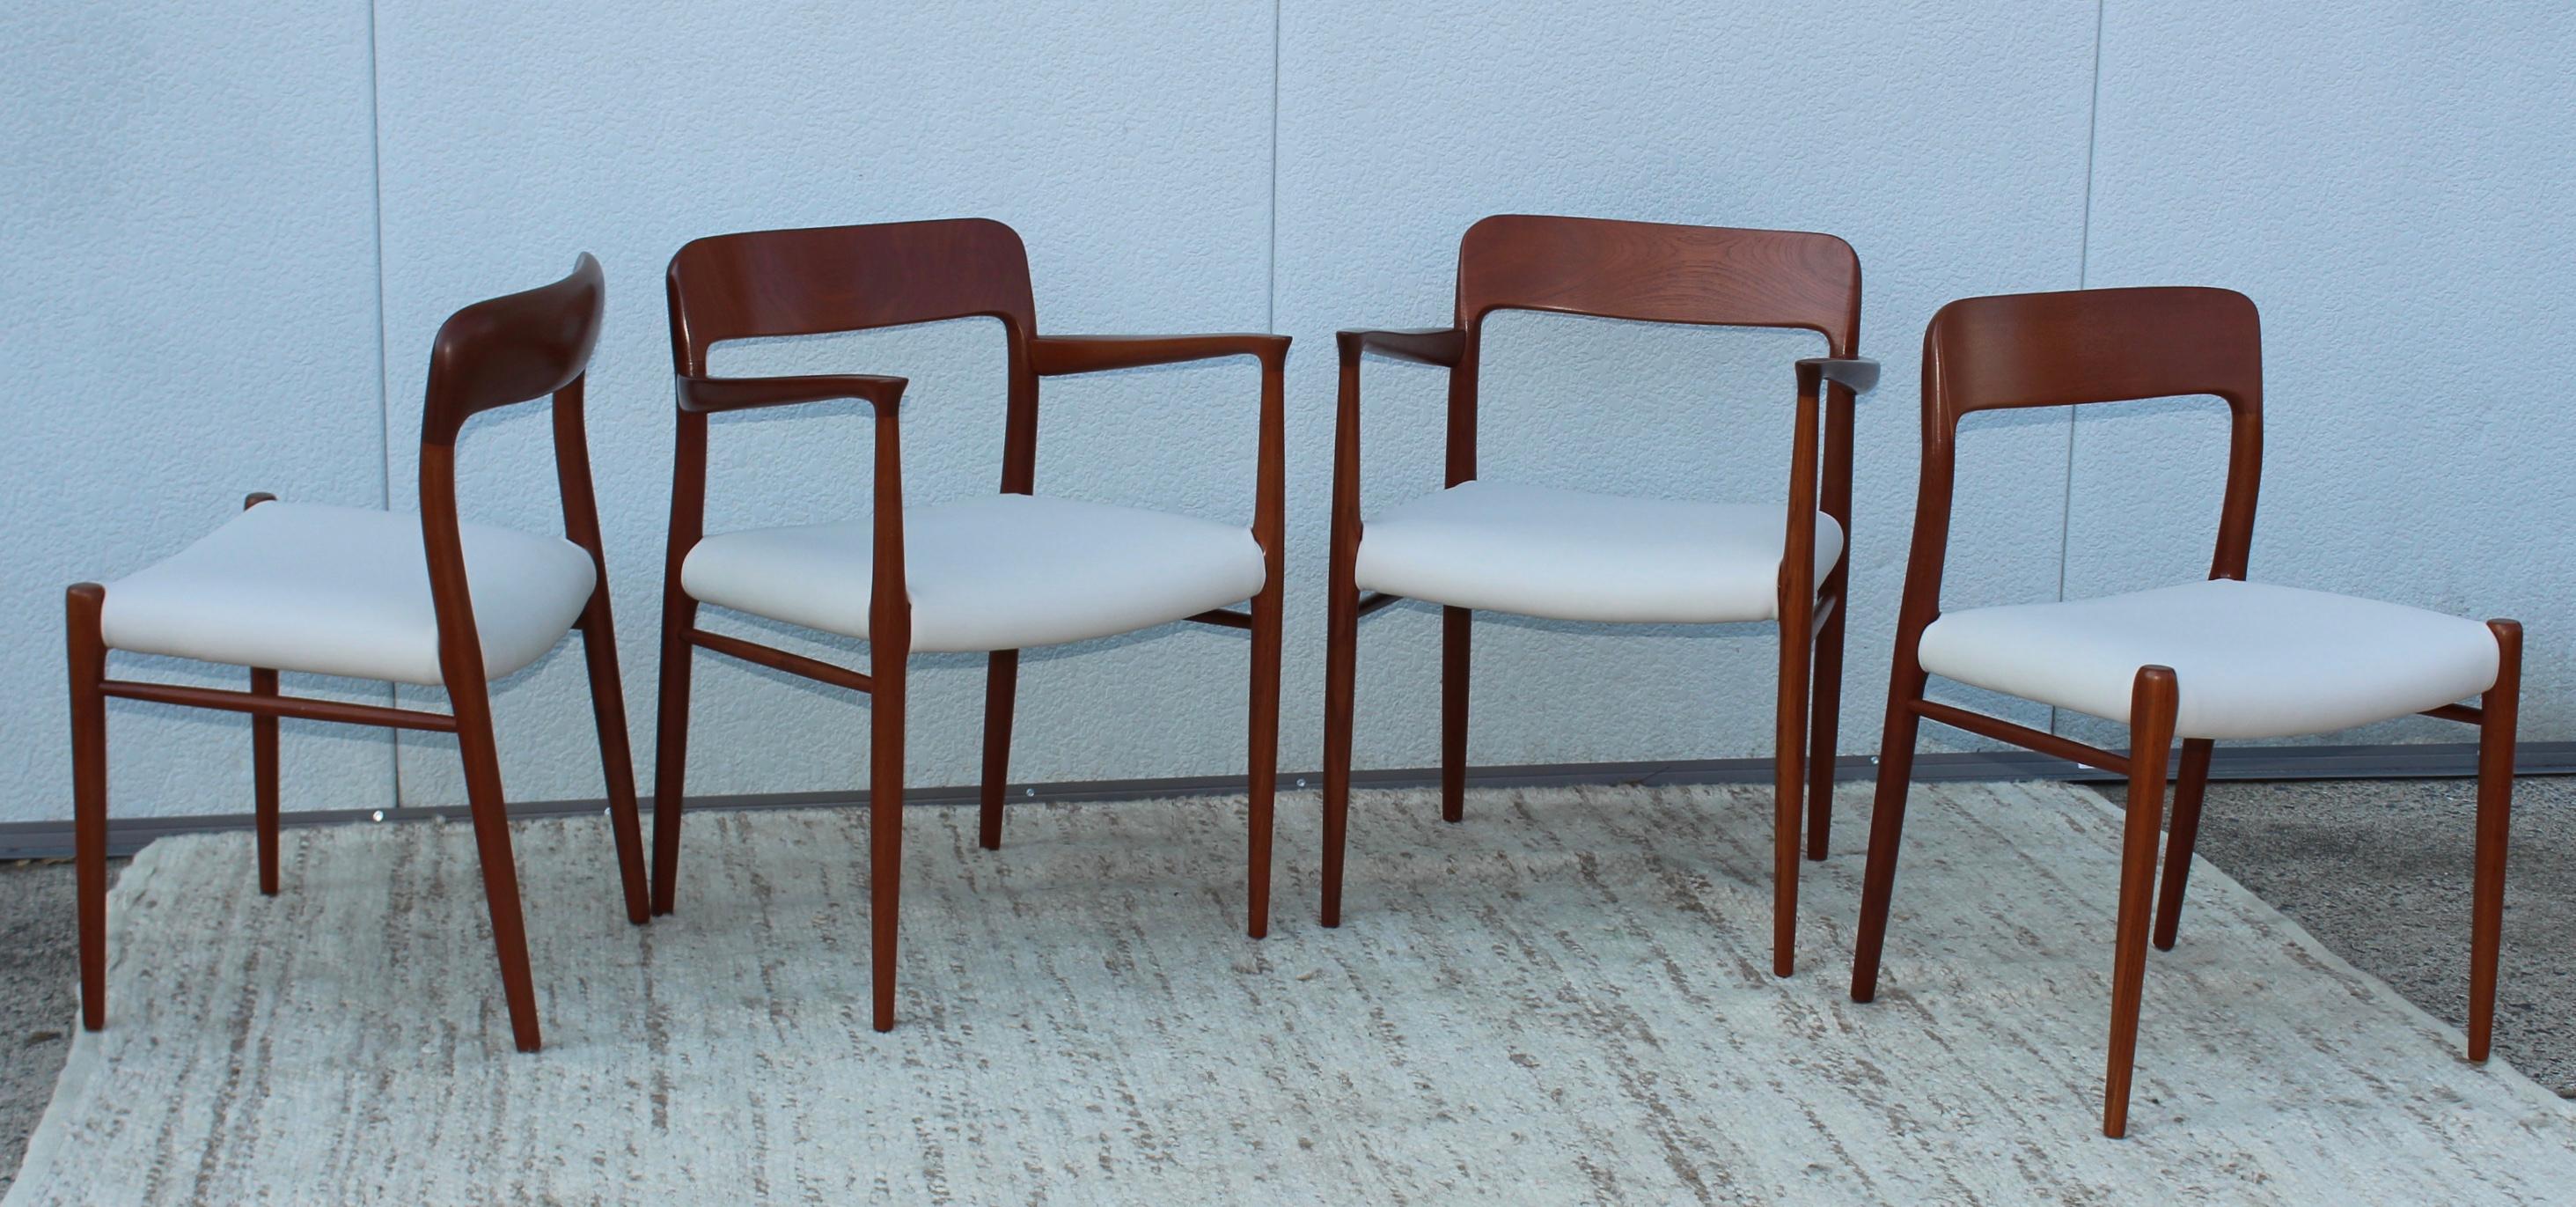 Stunning set of 4 Niels Otto Moller Model 75 teak and leather dining chairs, fully restored and re-upholstered in leather.

Side chairs measurements: width 19.5'' depth 17.5'' height 29.75'' seat 17.5''.